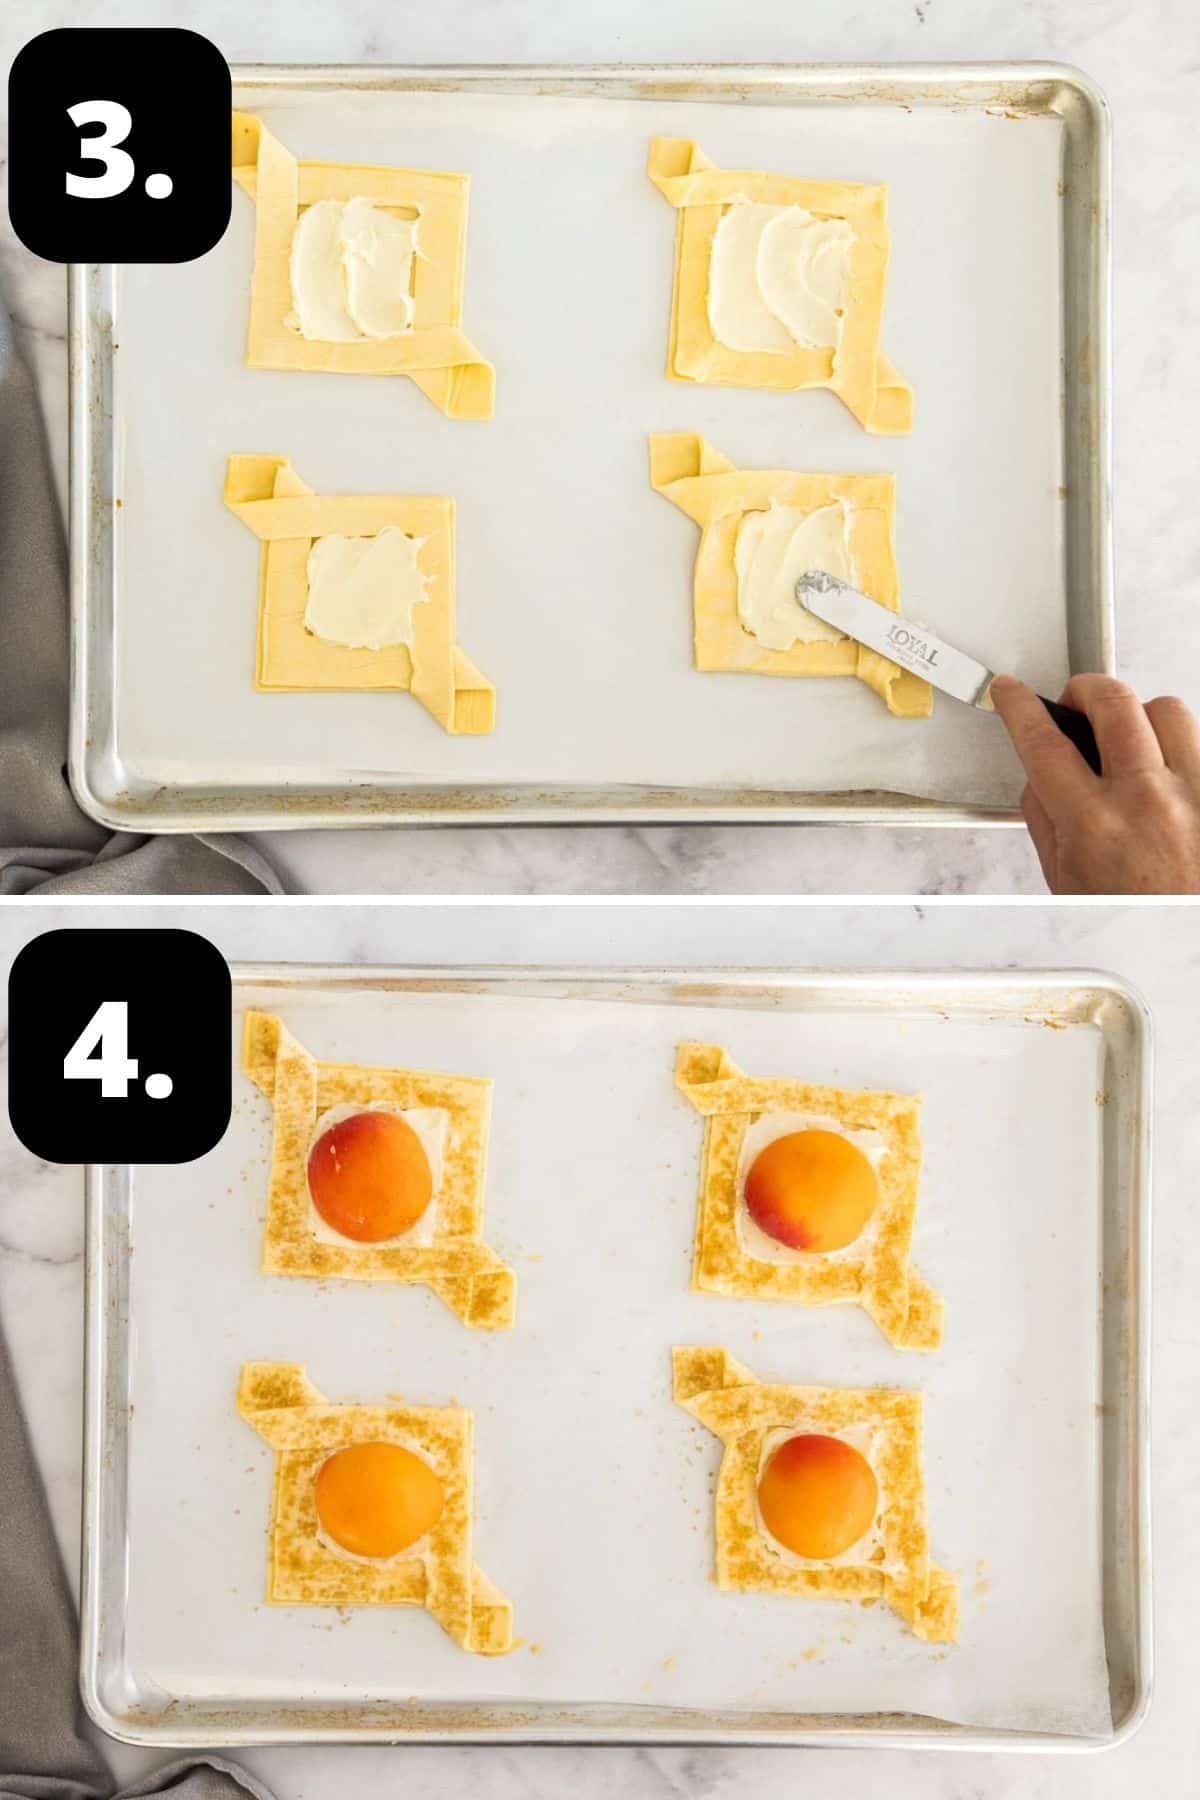 Steps 3-4 of preparing this recipe: adding the cream cheese to the pastry and topping with the apricot half.